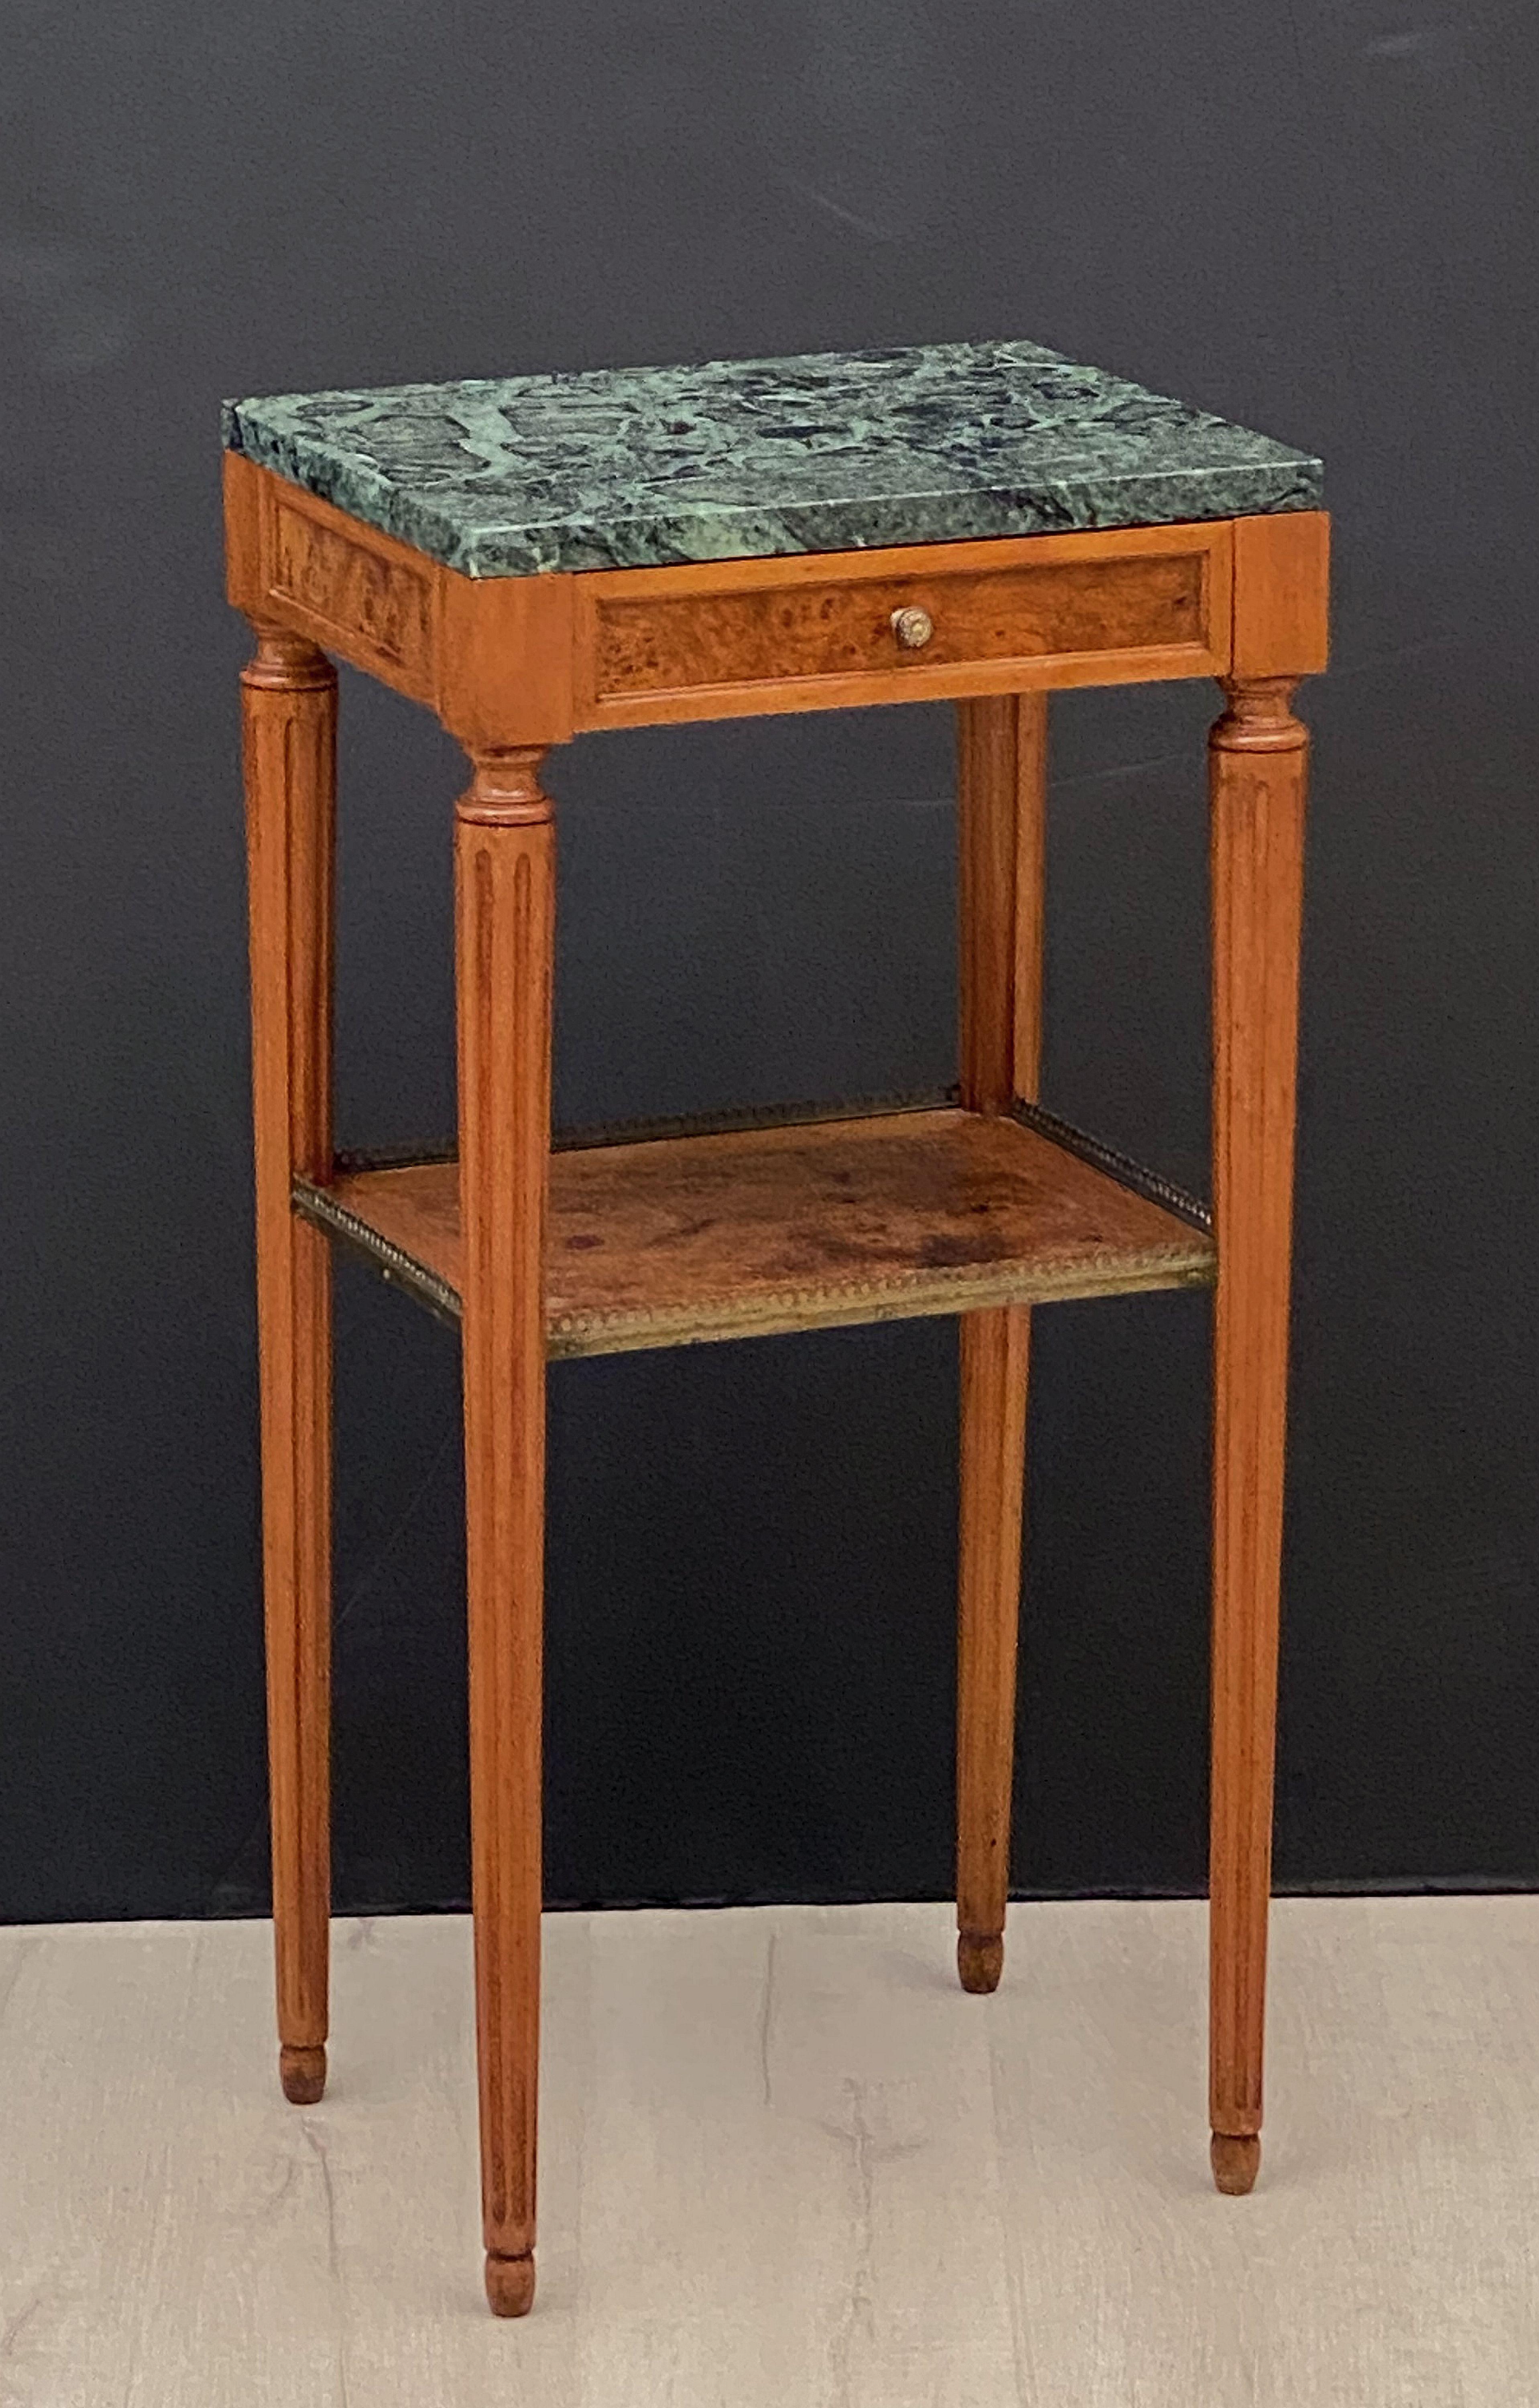 A fine pair of French bedside end tables or nightstands, each rectangular stand featuring a figured marble top over a frieze with one drawer, the drawer with decorative brass knob pull and burled wood accents, over a bottom tier of inlaid wood with